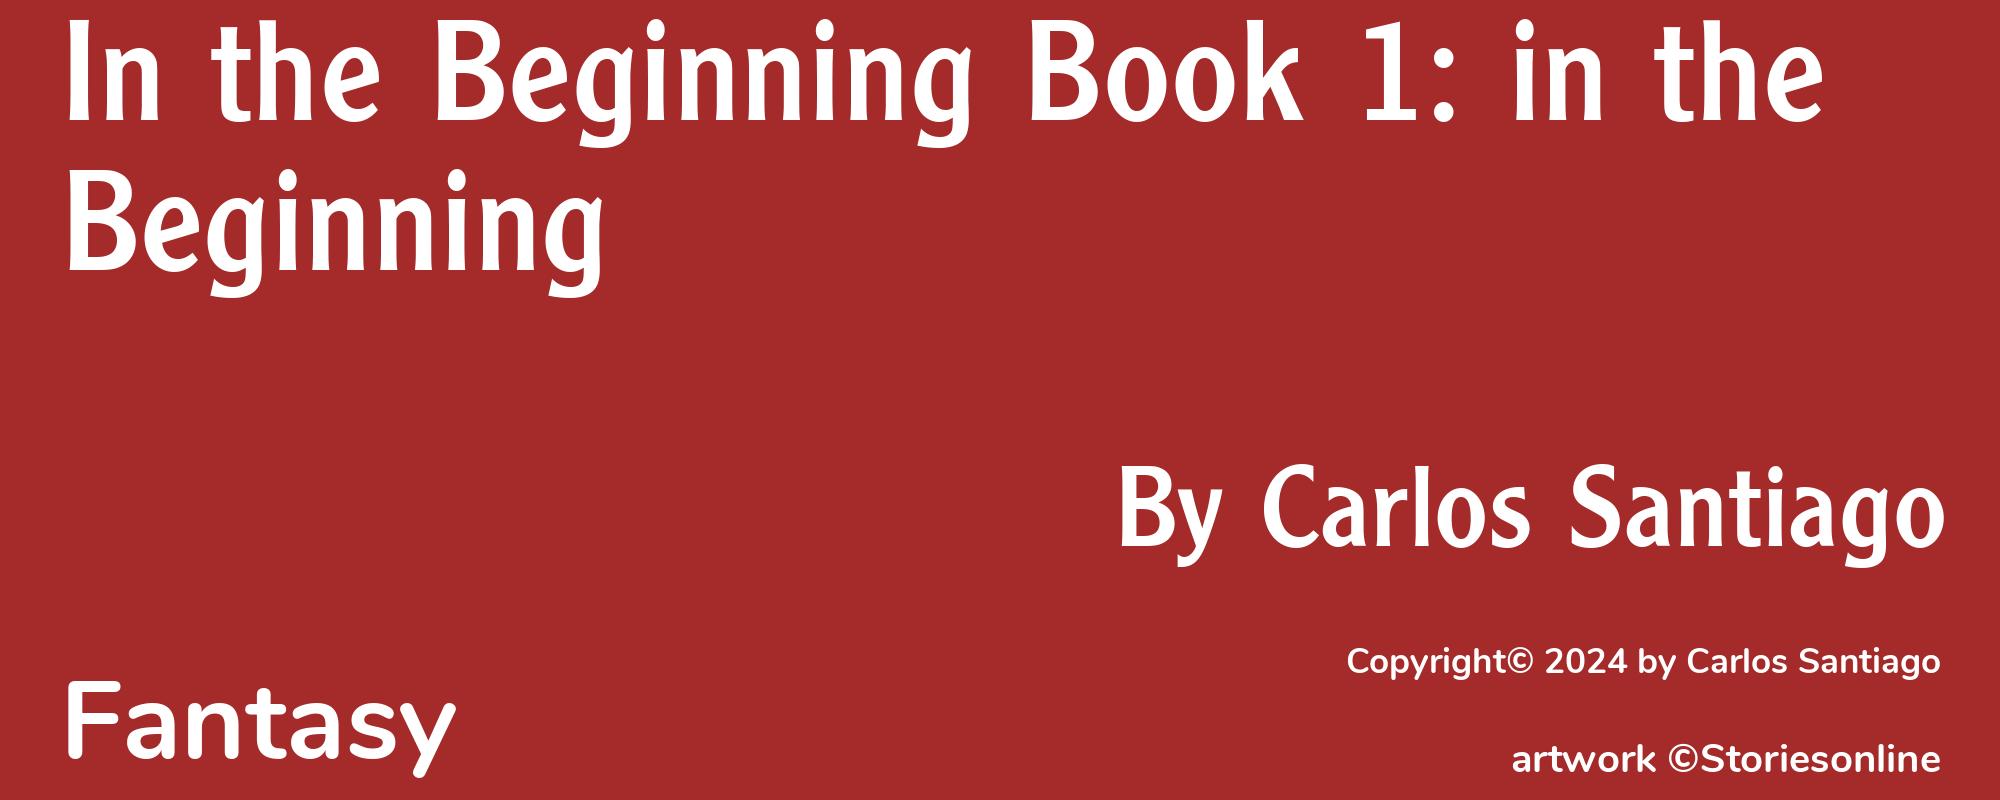 In the Beginning Book 1: in the Beginning - Cover